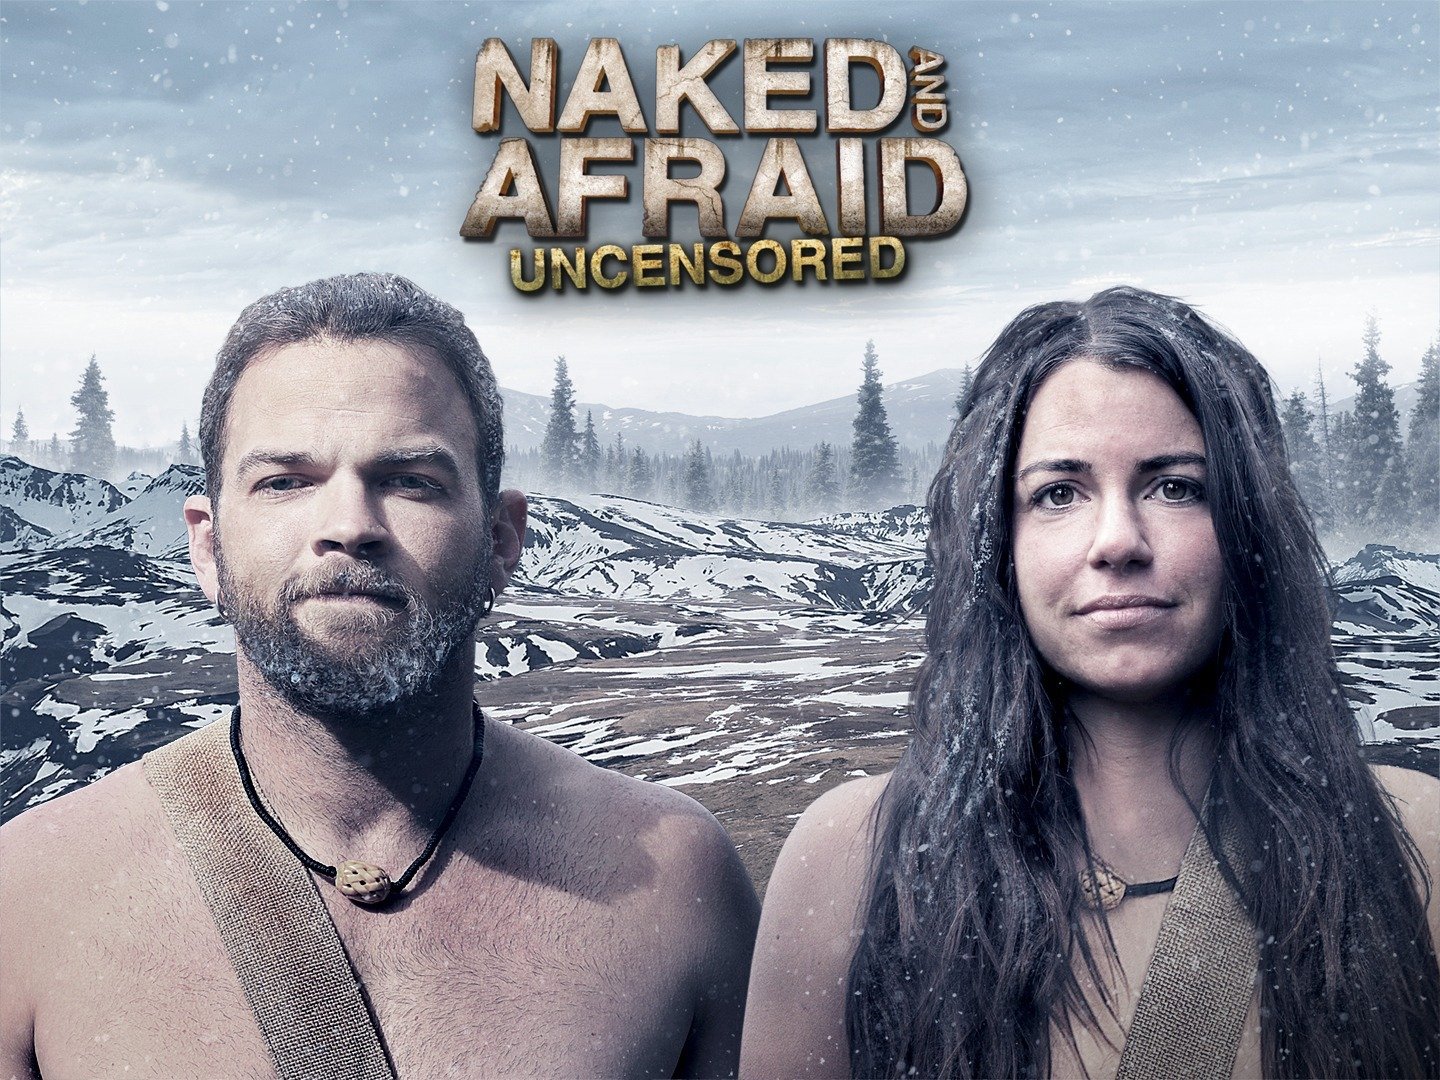 Naked and afraid non censored